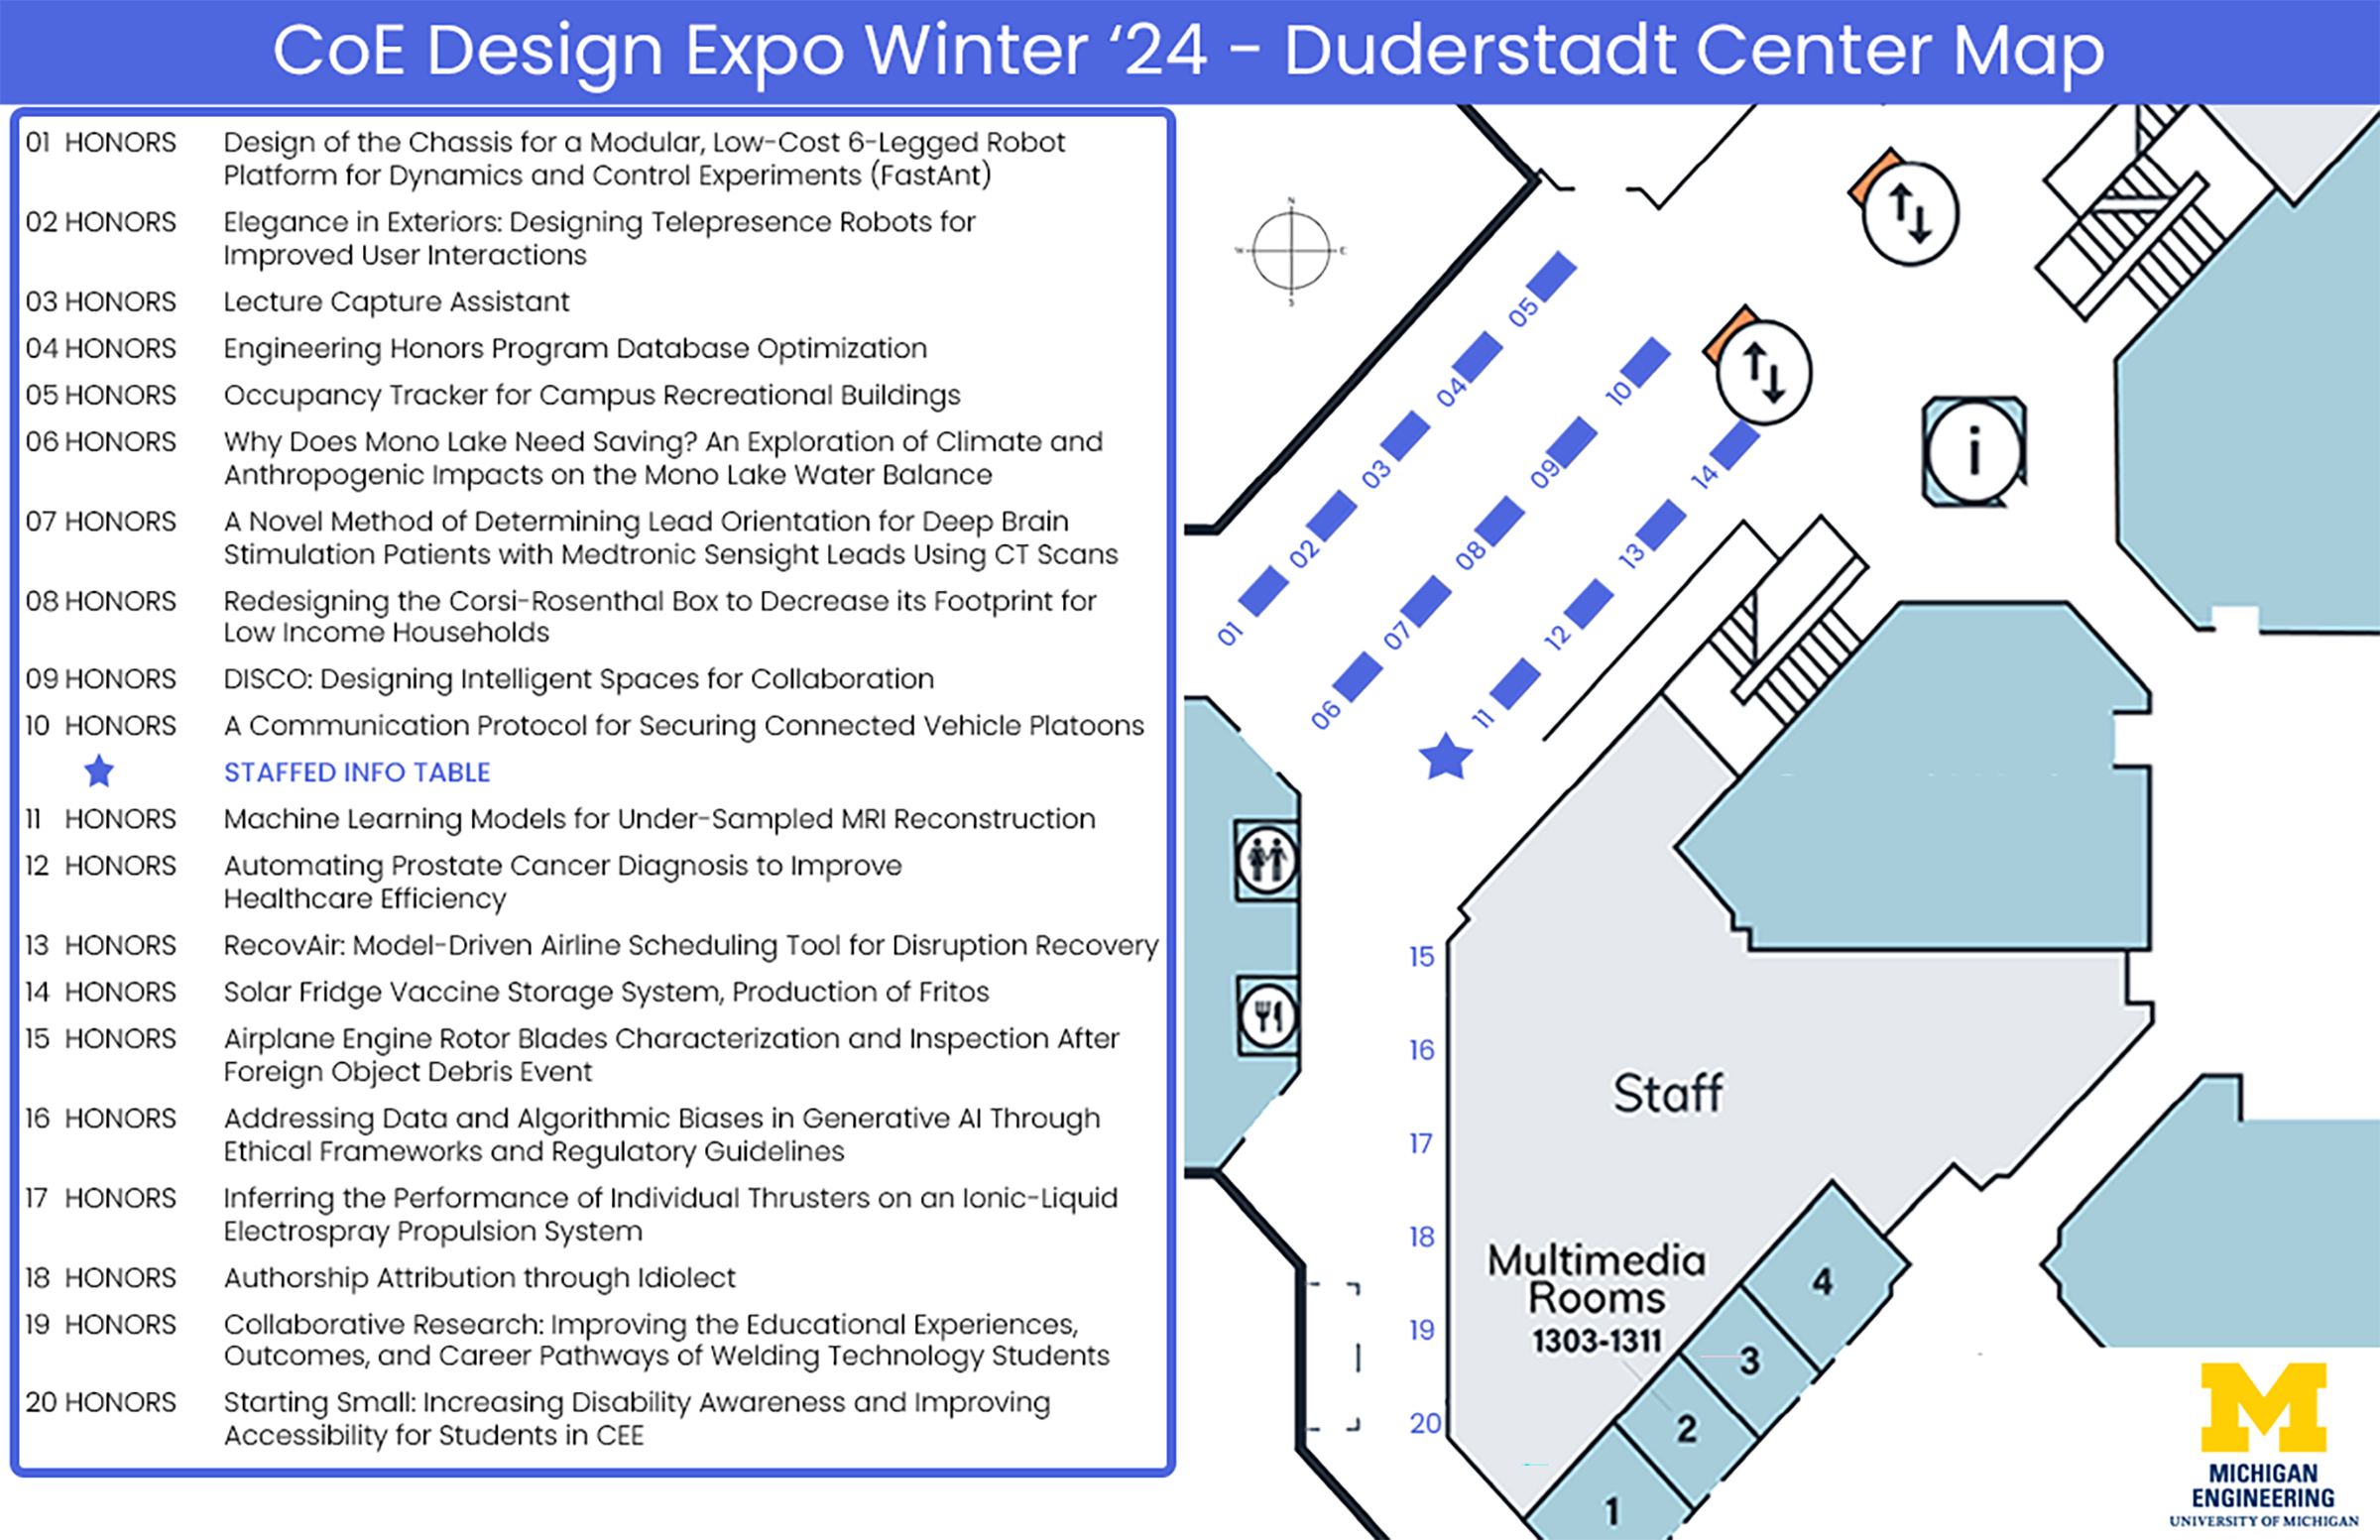 A map of the EECS Atrium for the Fall 2022 Design Expo.